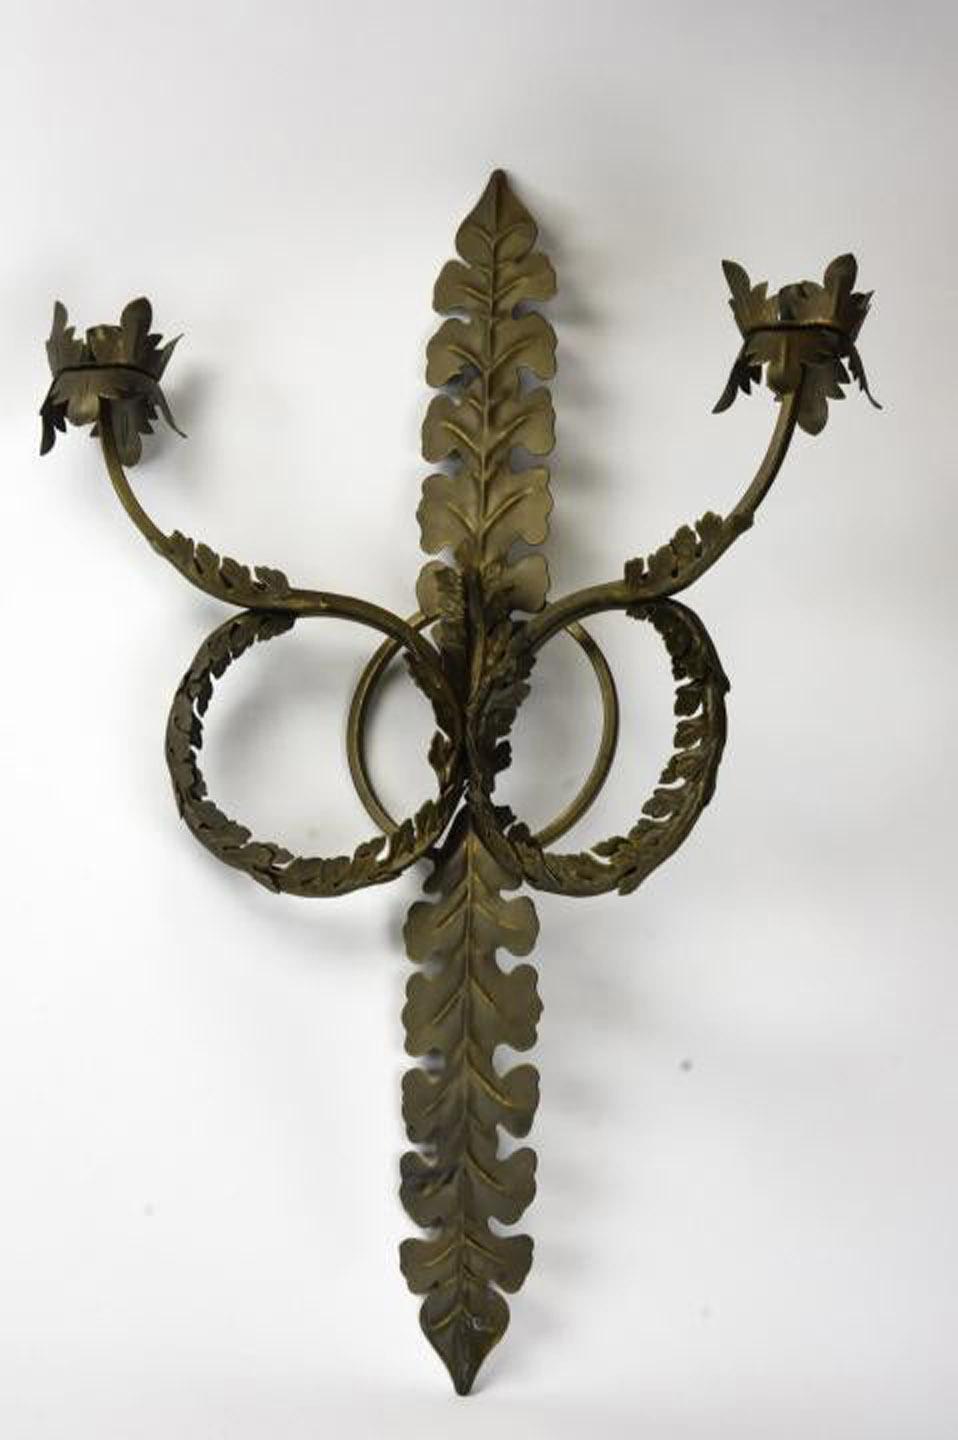 Pair of contemporary neoclassical style wall candle sconces in bronze tone, scroll and acanthus motifs.